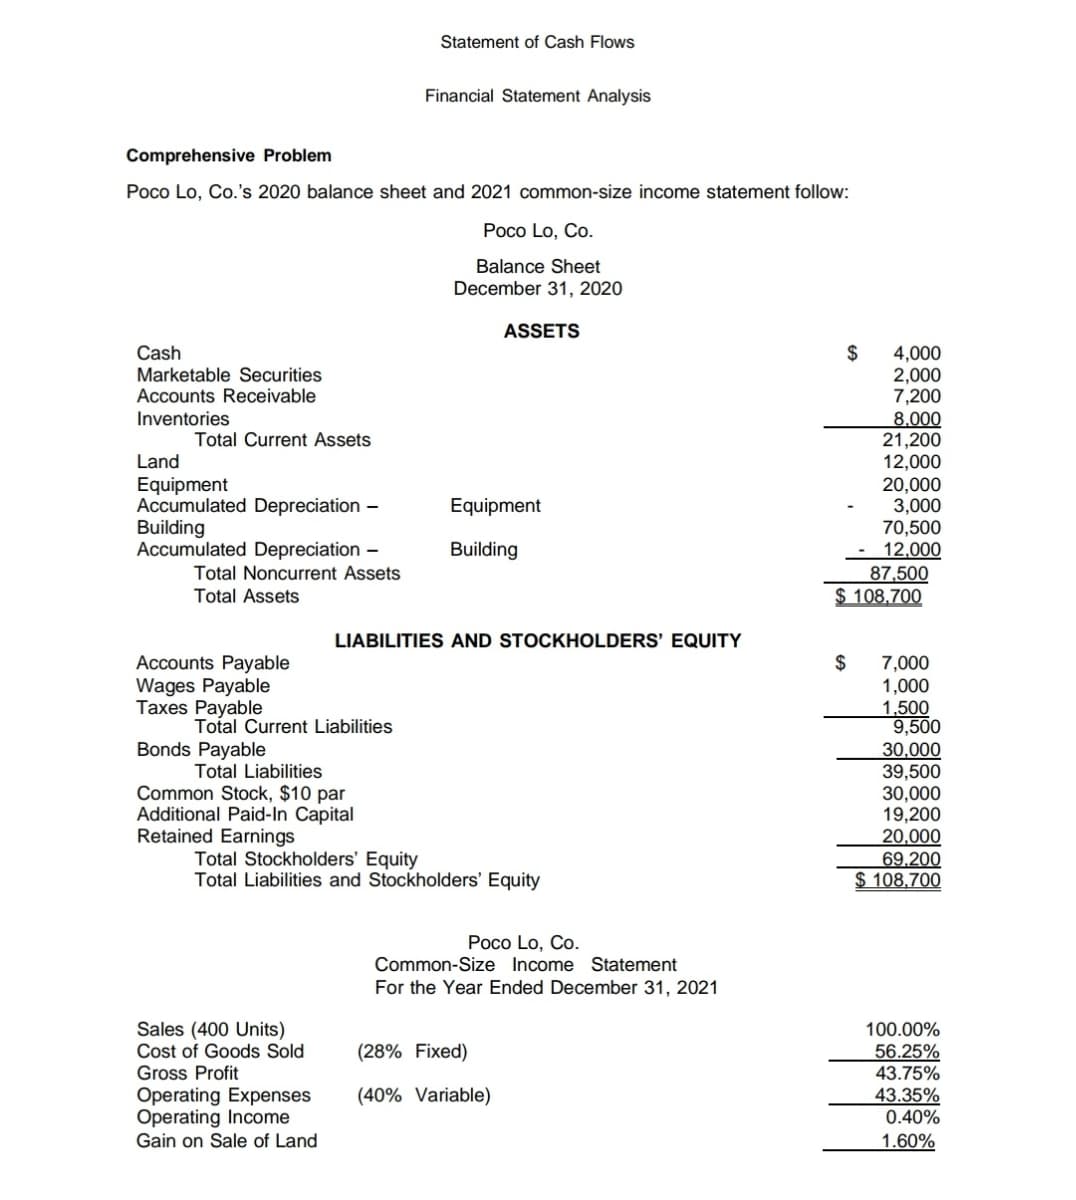 Statement of Cash Flows
Financial Statement Analysis
Comprehensive Problem
Poco Lo, Co.'s 2020 balance sheet and 2021 common-size income statement follow:
Poco Lo, Co.
Balance Sheet
December 31, 2020
ASSETS
Cash
Marketable Securities
Accounts Receivable
$
4,000
2,000
7,200
8.000
21,200
12,000
20,000
3,000
70,500
12,000
87,500
$ 108,700
Inventories
Total Current Assets
Land
Equipment
Accumulated Depreciation –
Building
Accumulated Depreciation –
Equipment
Building
Total Noncurrent Assets
Total Assets
LIABILITIES AND STOCKHOLDERS’ EQUITY
Accounts Payable
Wages Payable
Taxes Payable
$
7,000
1,000
1,500
9,500
30,000
39,500
30,000
19,200
20,000
69,200
$ 108,700
Total Current Liabilities
Bonds Payable
Total Liabilities
Common Stock, $10 par
Additional Paid-In Capital
Retained Earnings
Total Stockholders' Equity
Total Liabilities and Stockholders' Equity
Poco Lo, Co.
Common-Size Income Statement
For the Year Ended December 31, 2021
Sales (400 Units)
Cost of Goods Sold
100.00%
(28% Fixed)
56.25%
43.75%
Gross Profit
Operating Expenses
Operating Income
Gain on Sale of Land
(40% Variable)
43.35%
0.40%
1.60%
